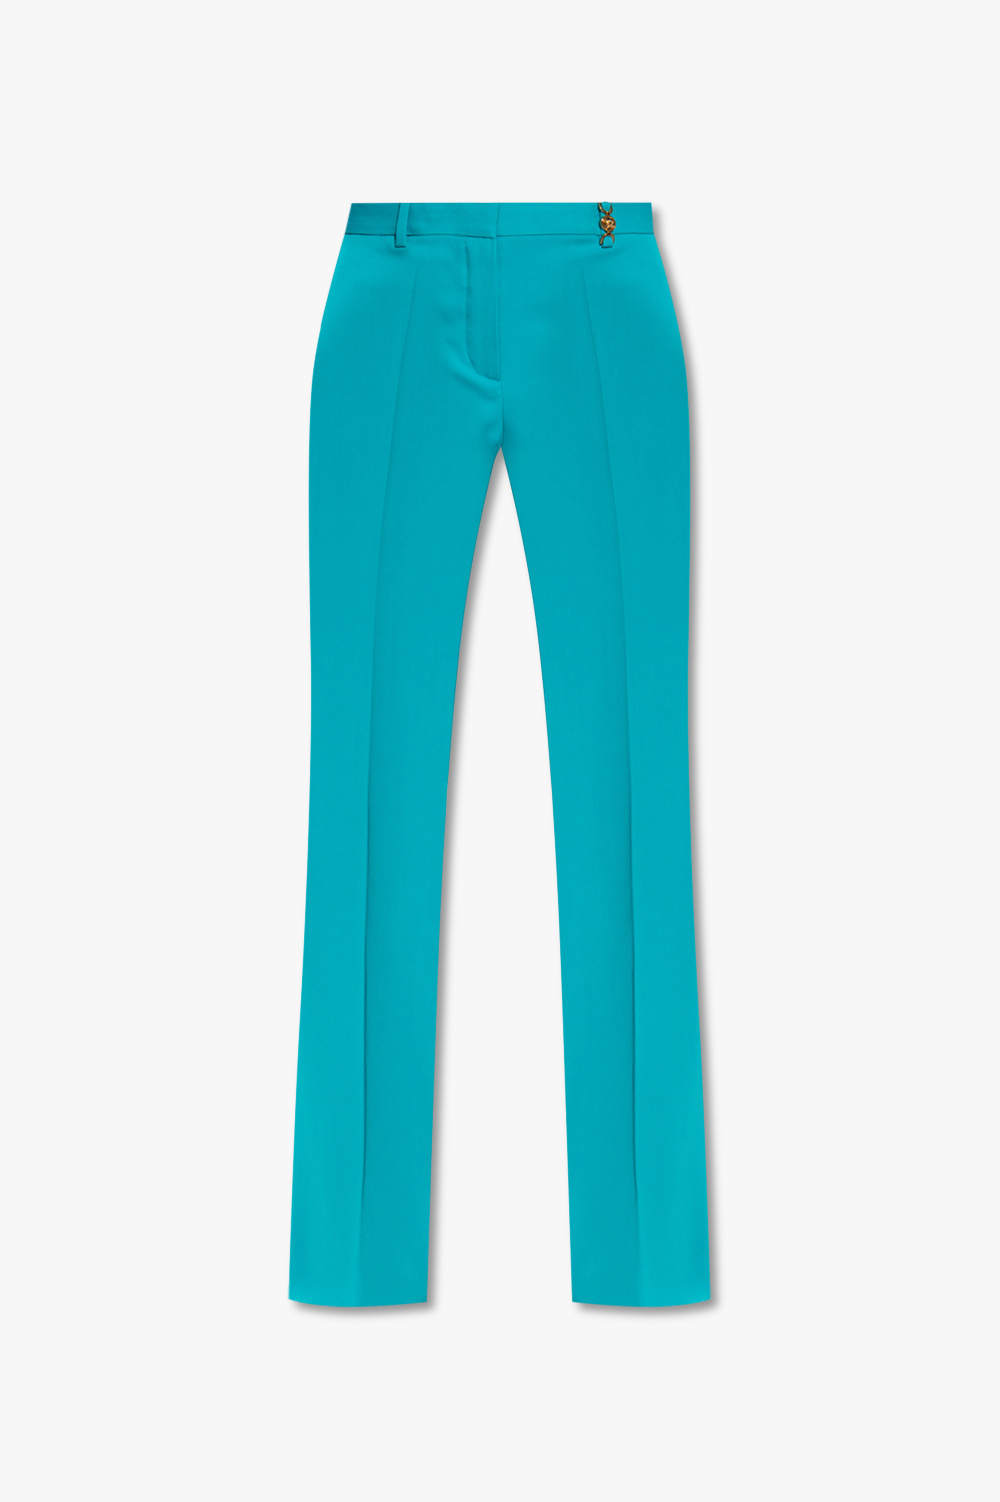 VERSACE JEANS COUTURE, Turquoise Women's Leggings